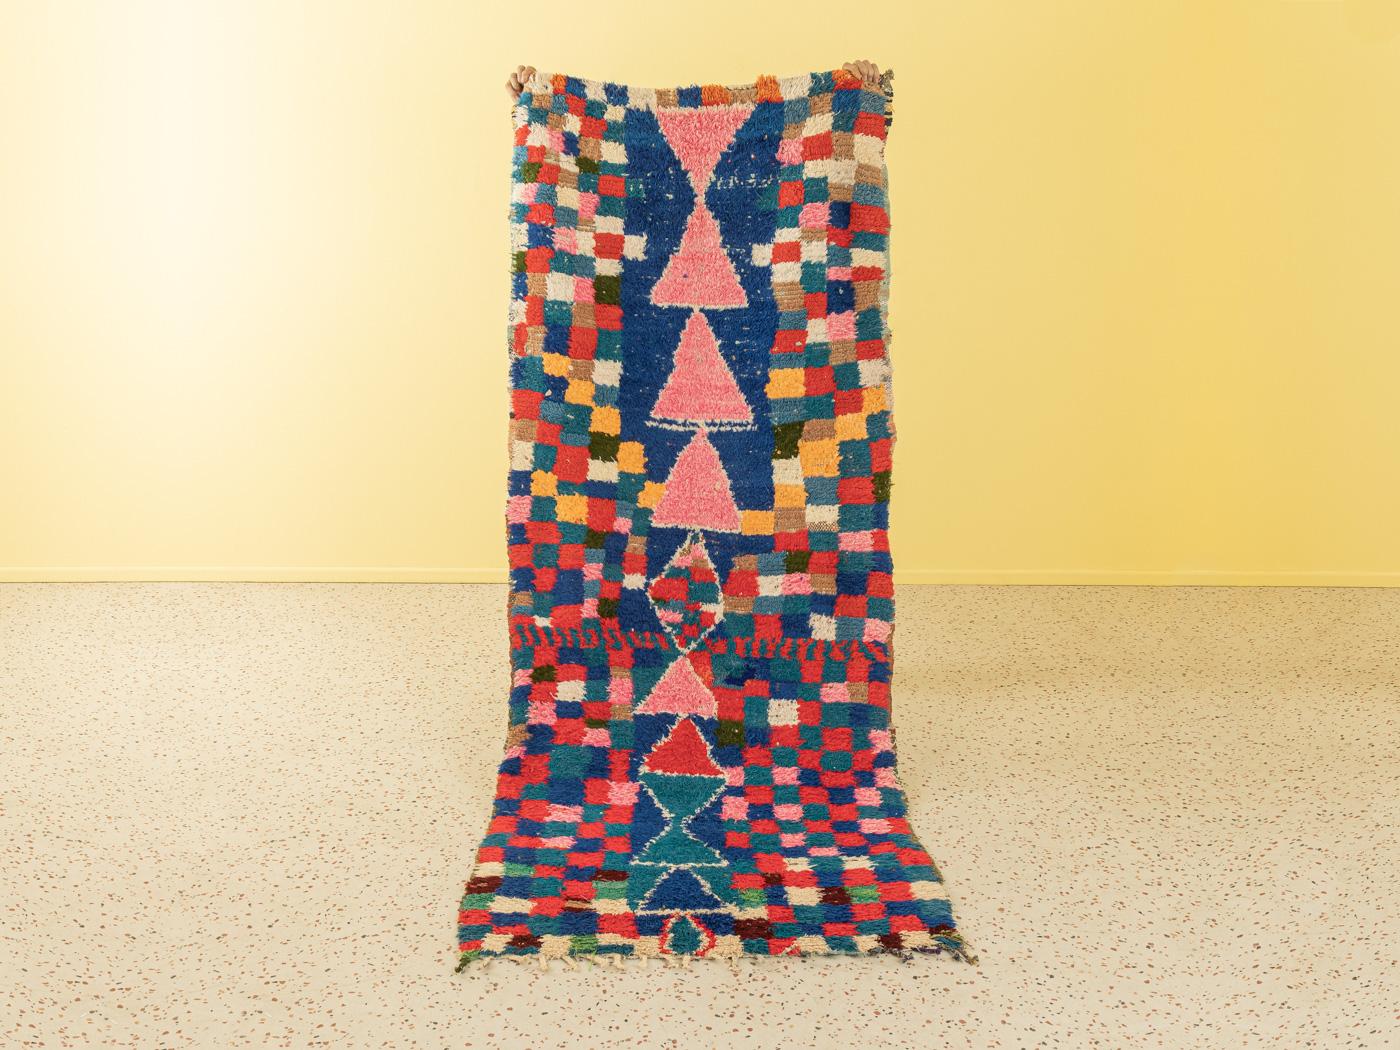 This Boujad is a vintage wool rug with some recycled textile parts – soft and comfortable underfoot. Our Berber rugs are handmade, one knot at a time. Each of our Berber rugs is a long-lasting one-of-a-kind piece, created in a sustainable manner